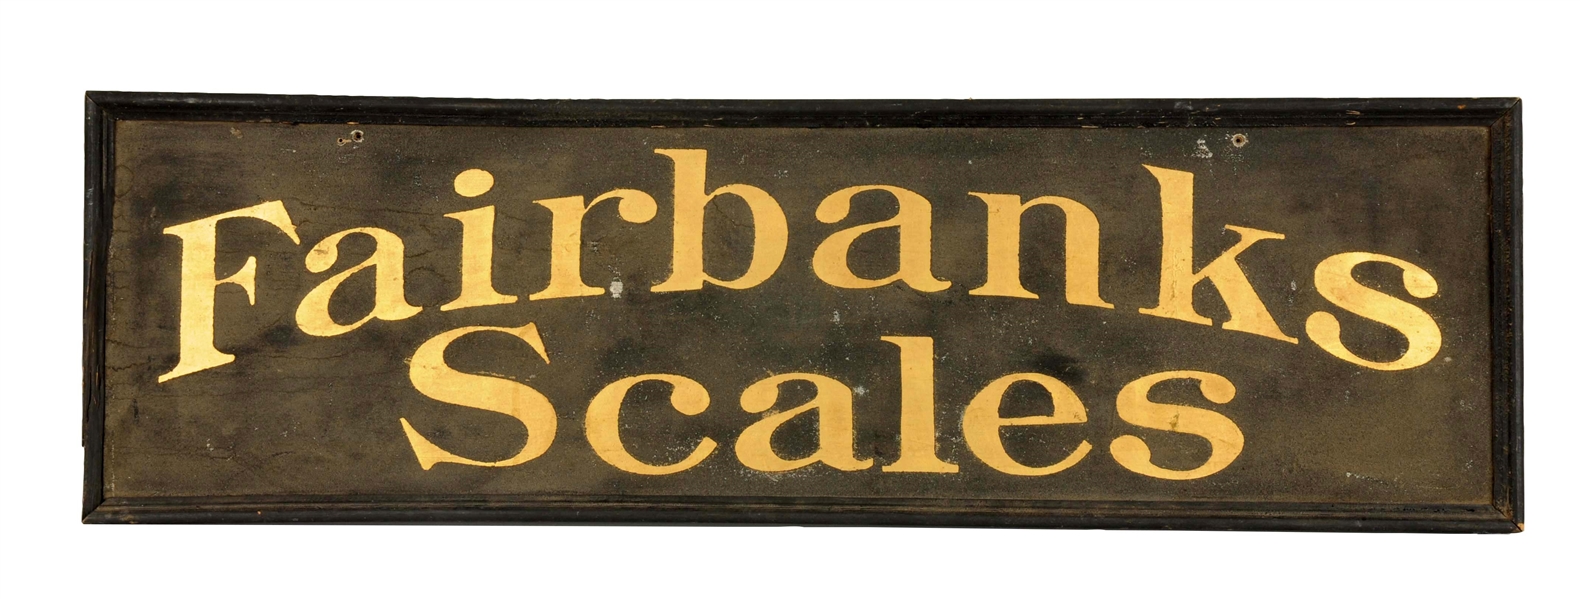 FAIRBANKS SCALE WOODEN ADVERTISING TRADE SIGN.